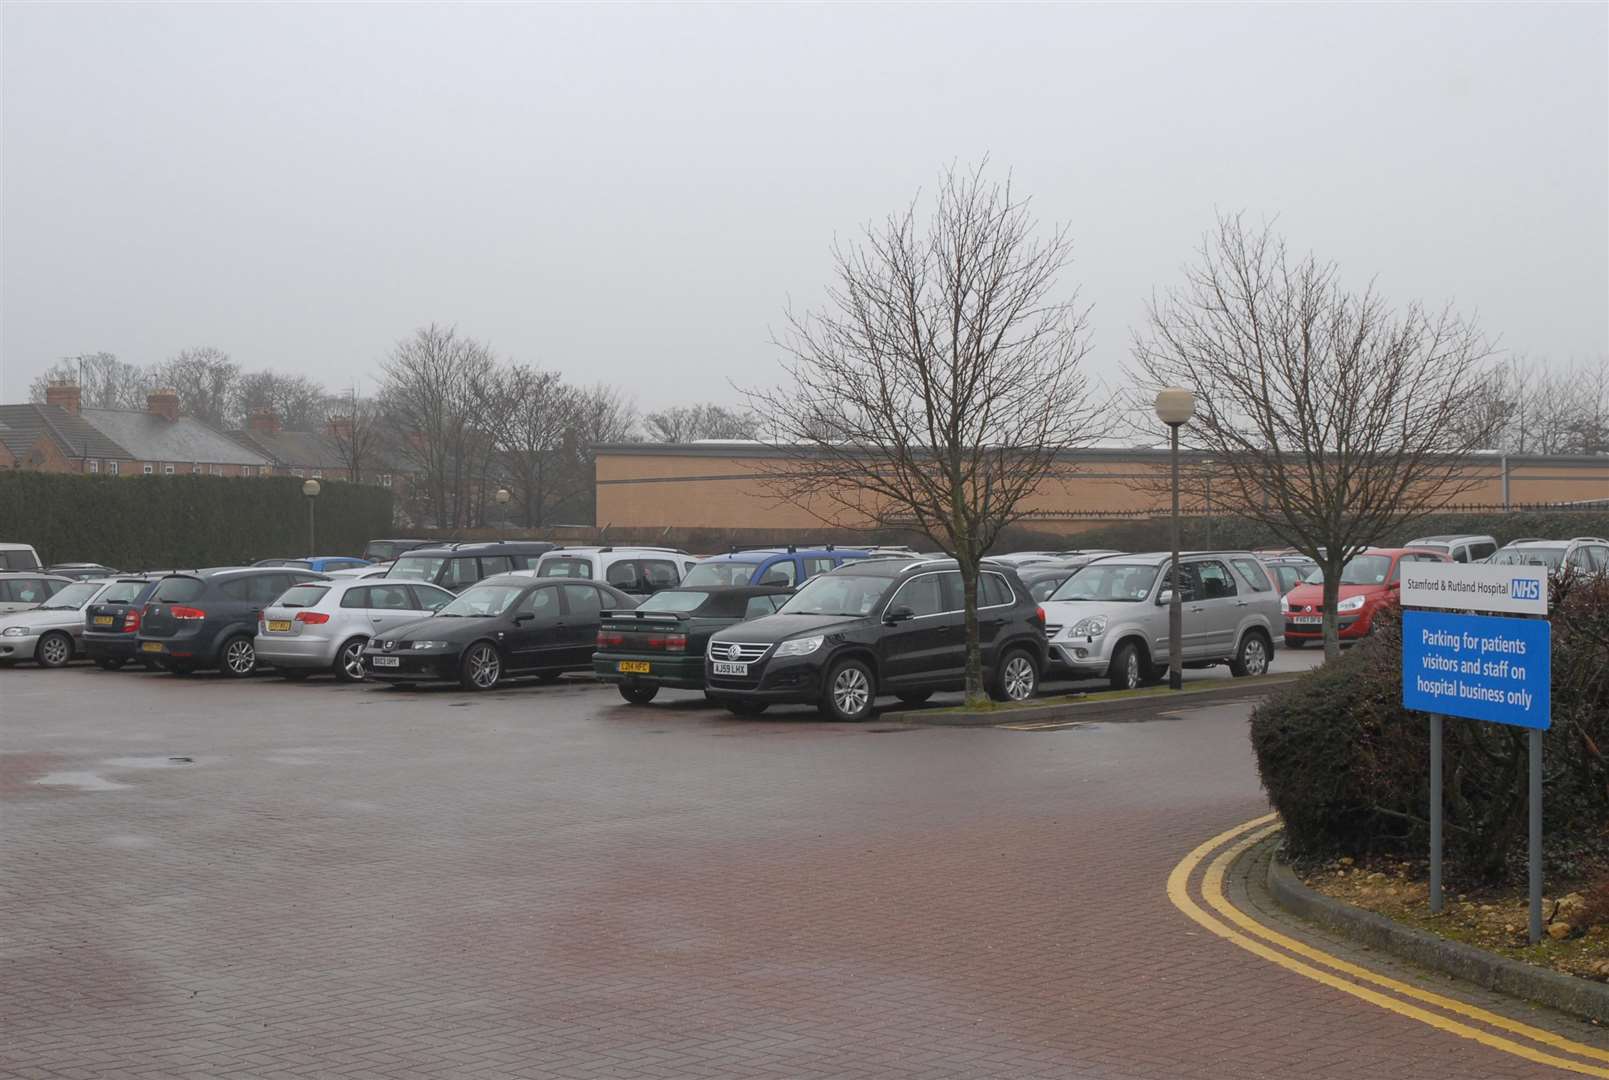 Hospital parking charges hit "the most vulnerable" hardest, says FairFuel UK